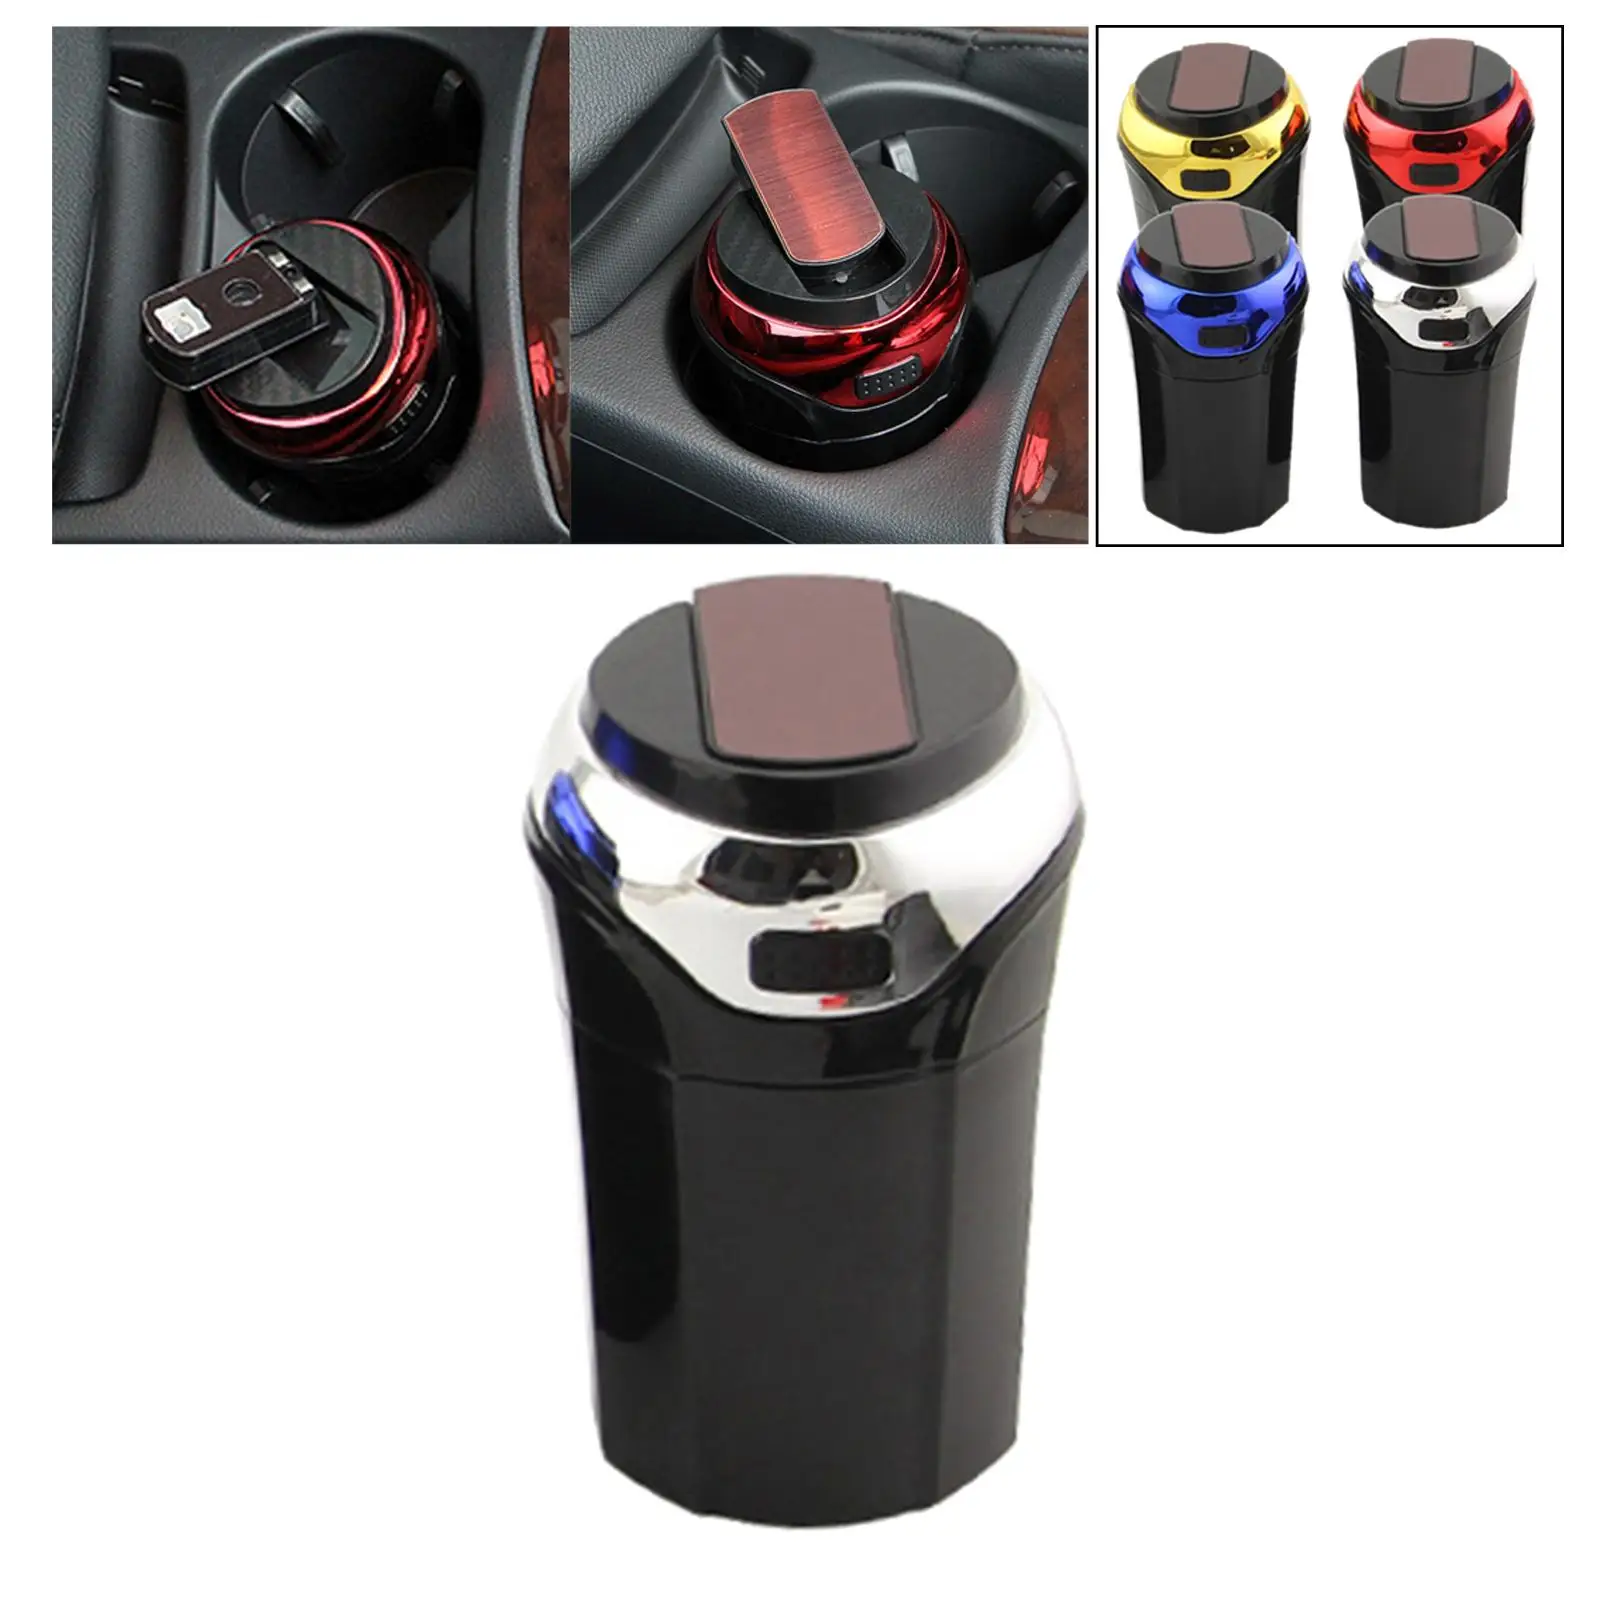 Portable Truck Car Cup Ash Smoke Remover Holder for Offiice/Home